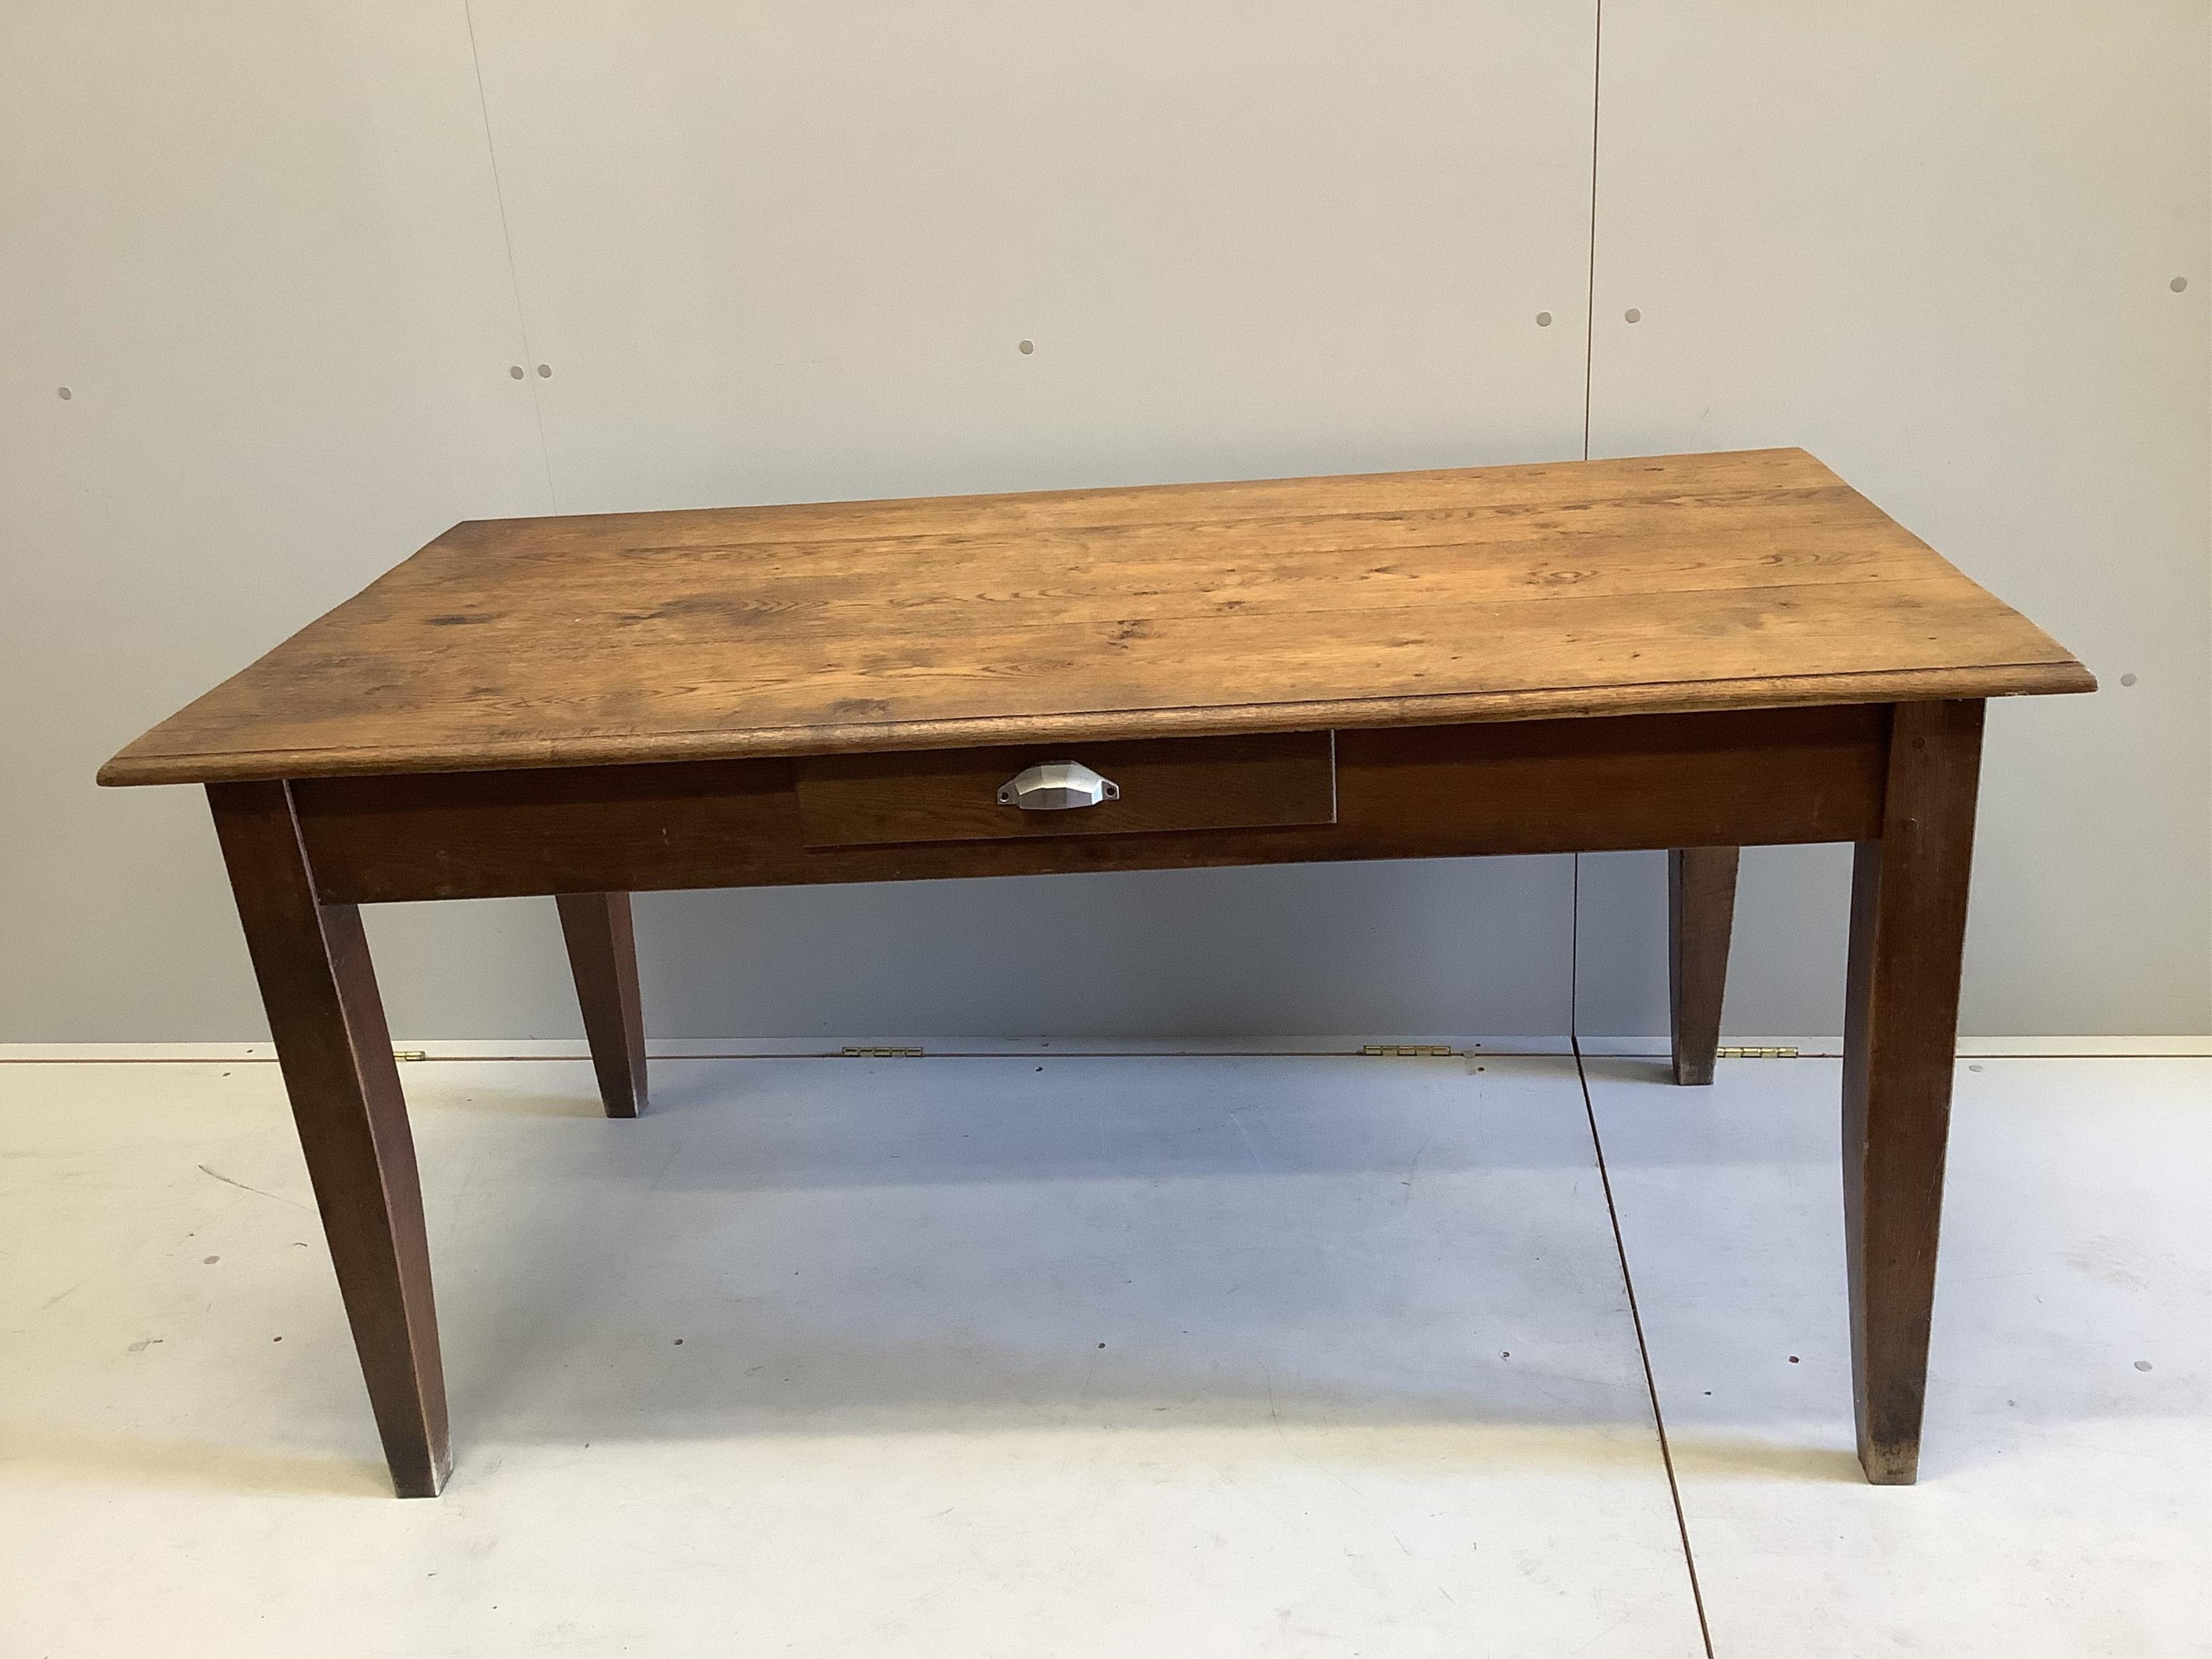 A French rectangular oak kitchen table with a single drawer, width 150cm, depth 78cm, height 75cm. Condition - fair